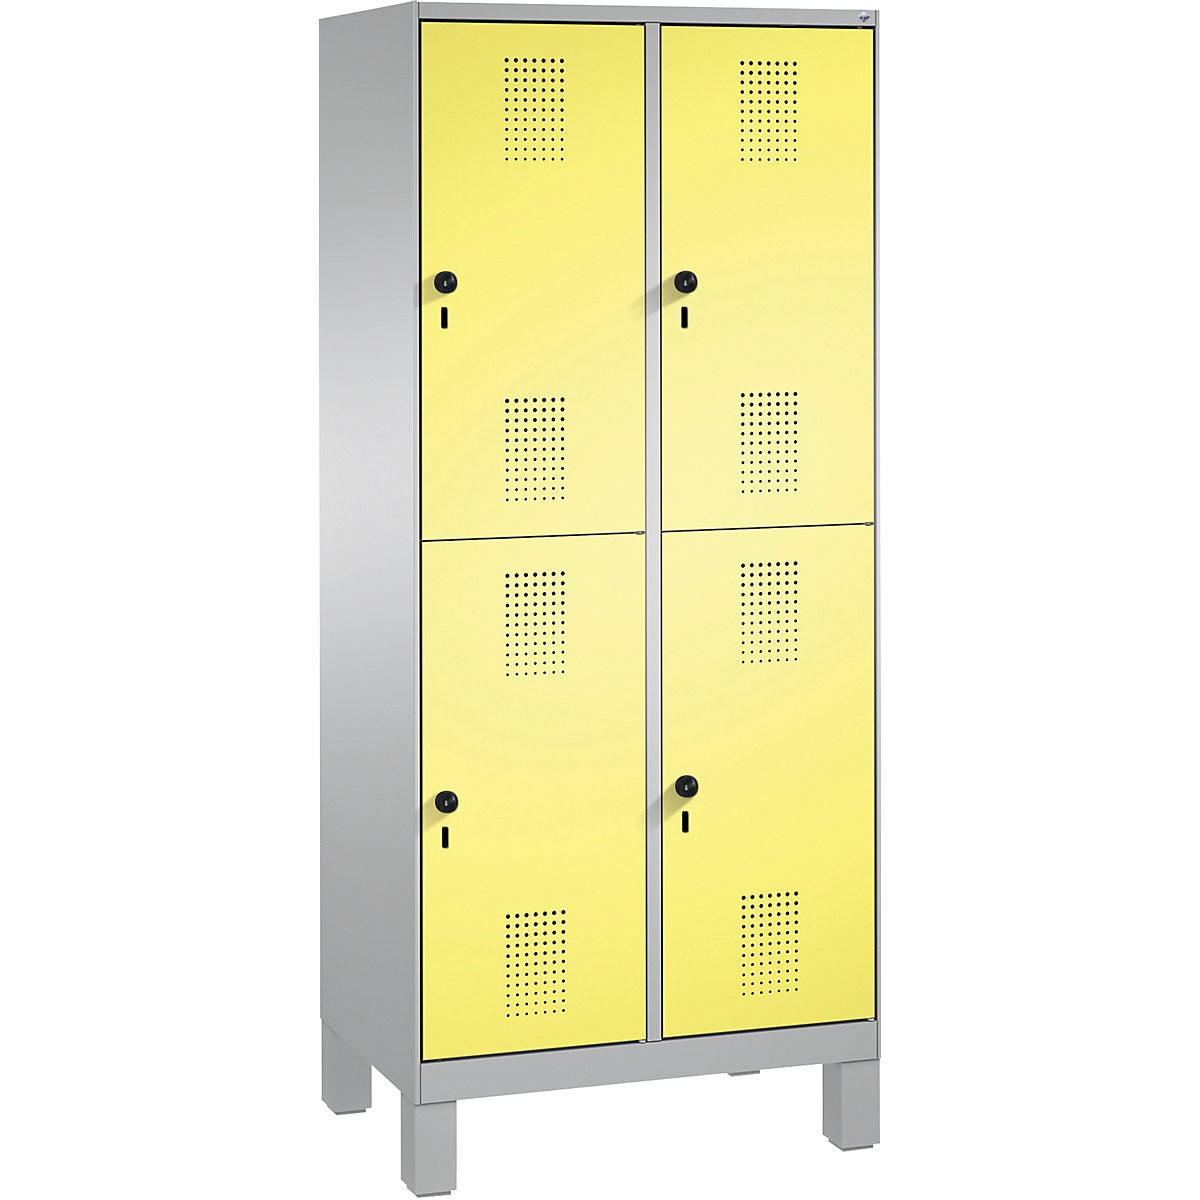 EVOLO cloakroom locker, double tier, with feet – C+P, 2 compartments, 2 shelf compartments each, compartment width 400 mm, white aluminium / sulphur yellow-3